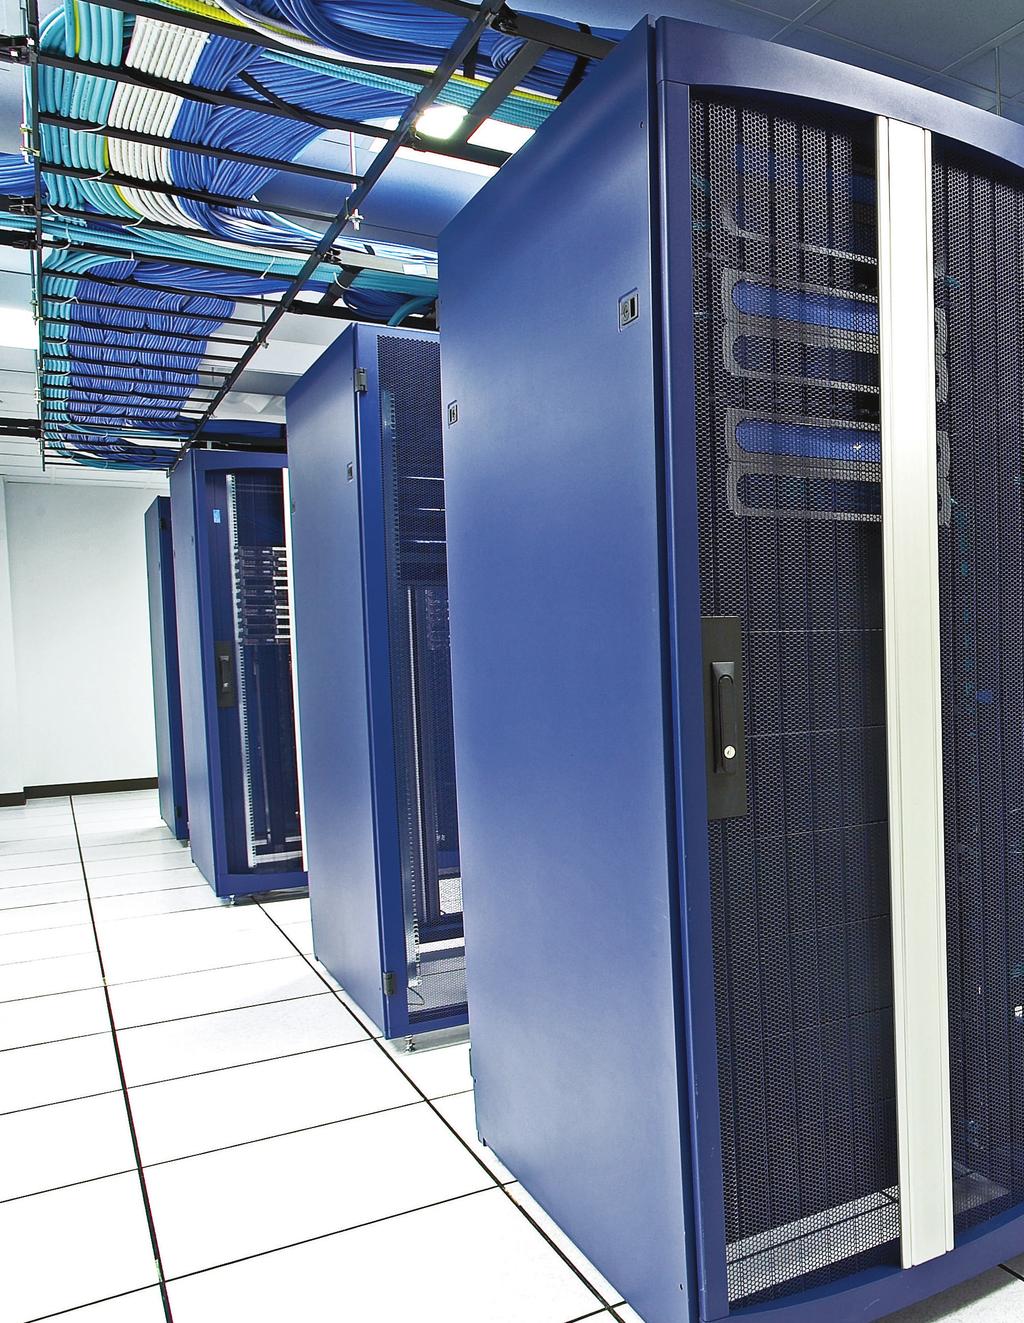 MISSION CRITICAL: DATA CENTERS, LABS,